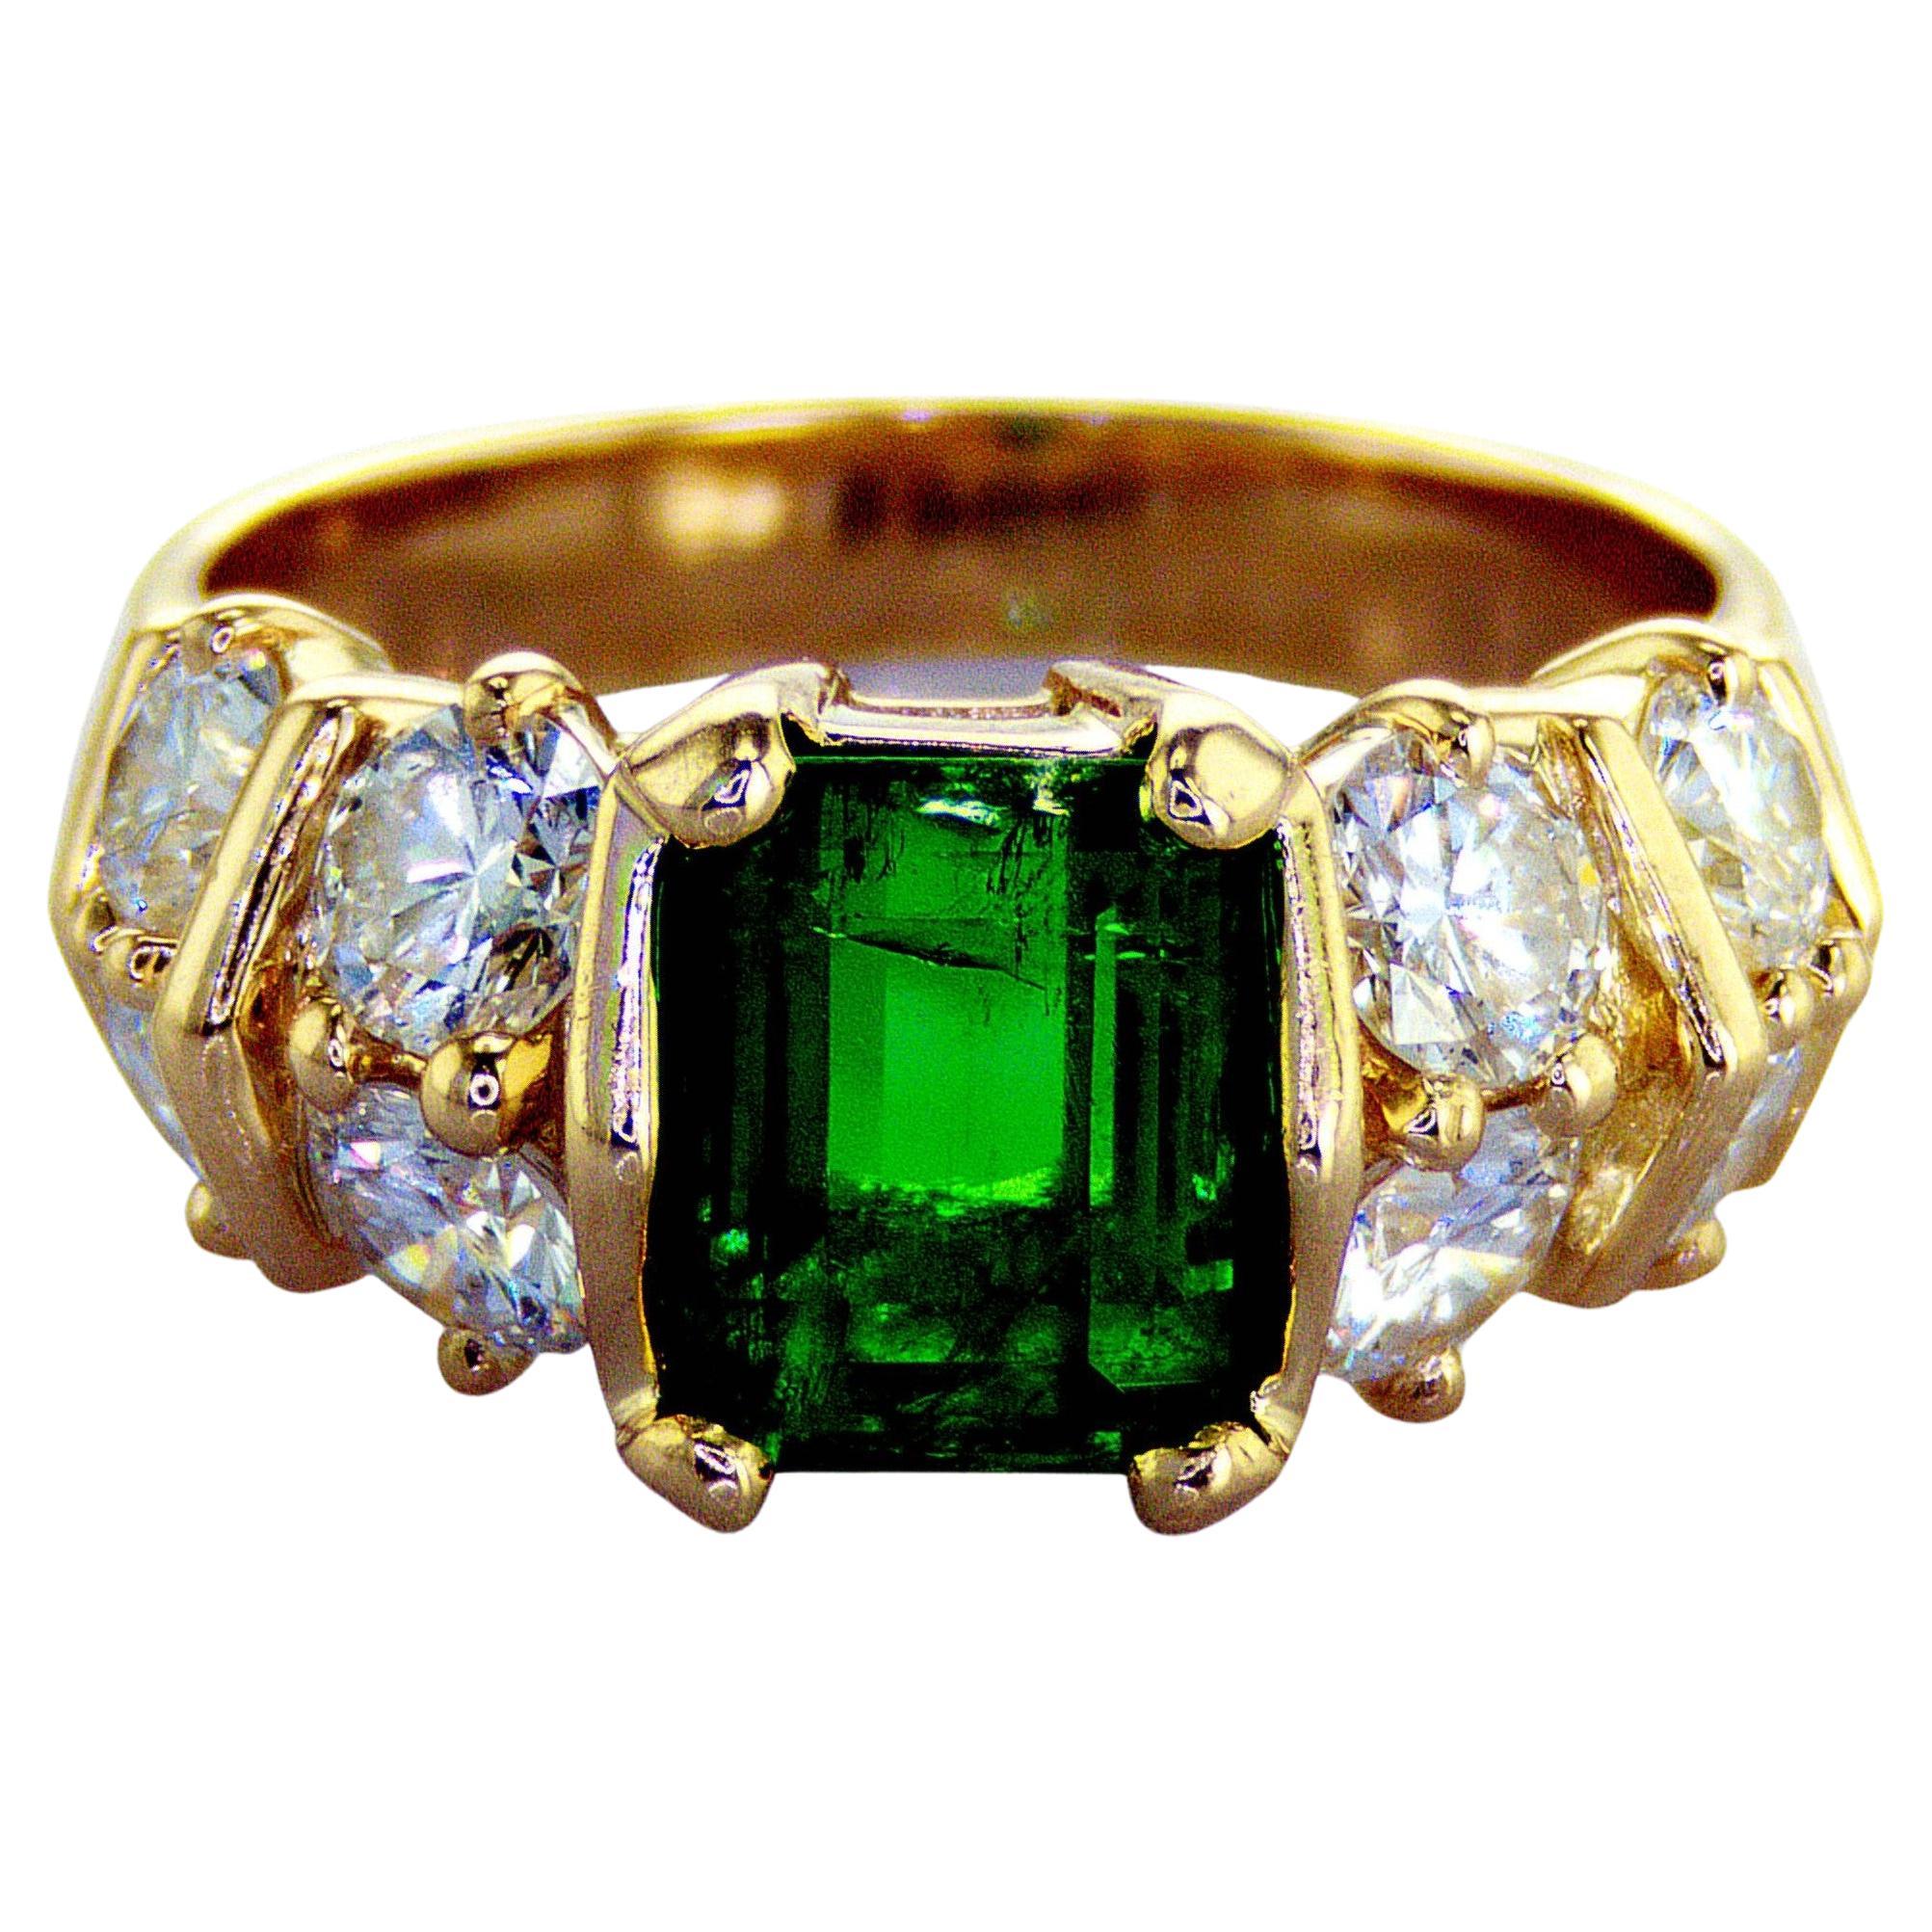 3.75 Carat Total Emerald Cut Emerald and Round Diamond 18 Karat Gold Band Ring For Sale